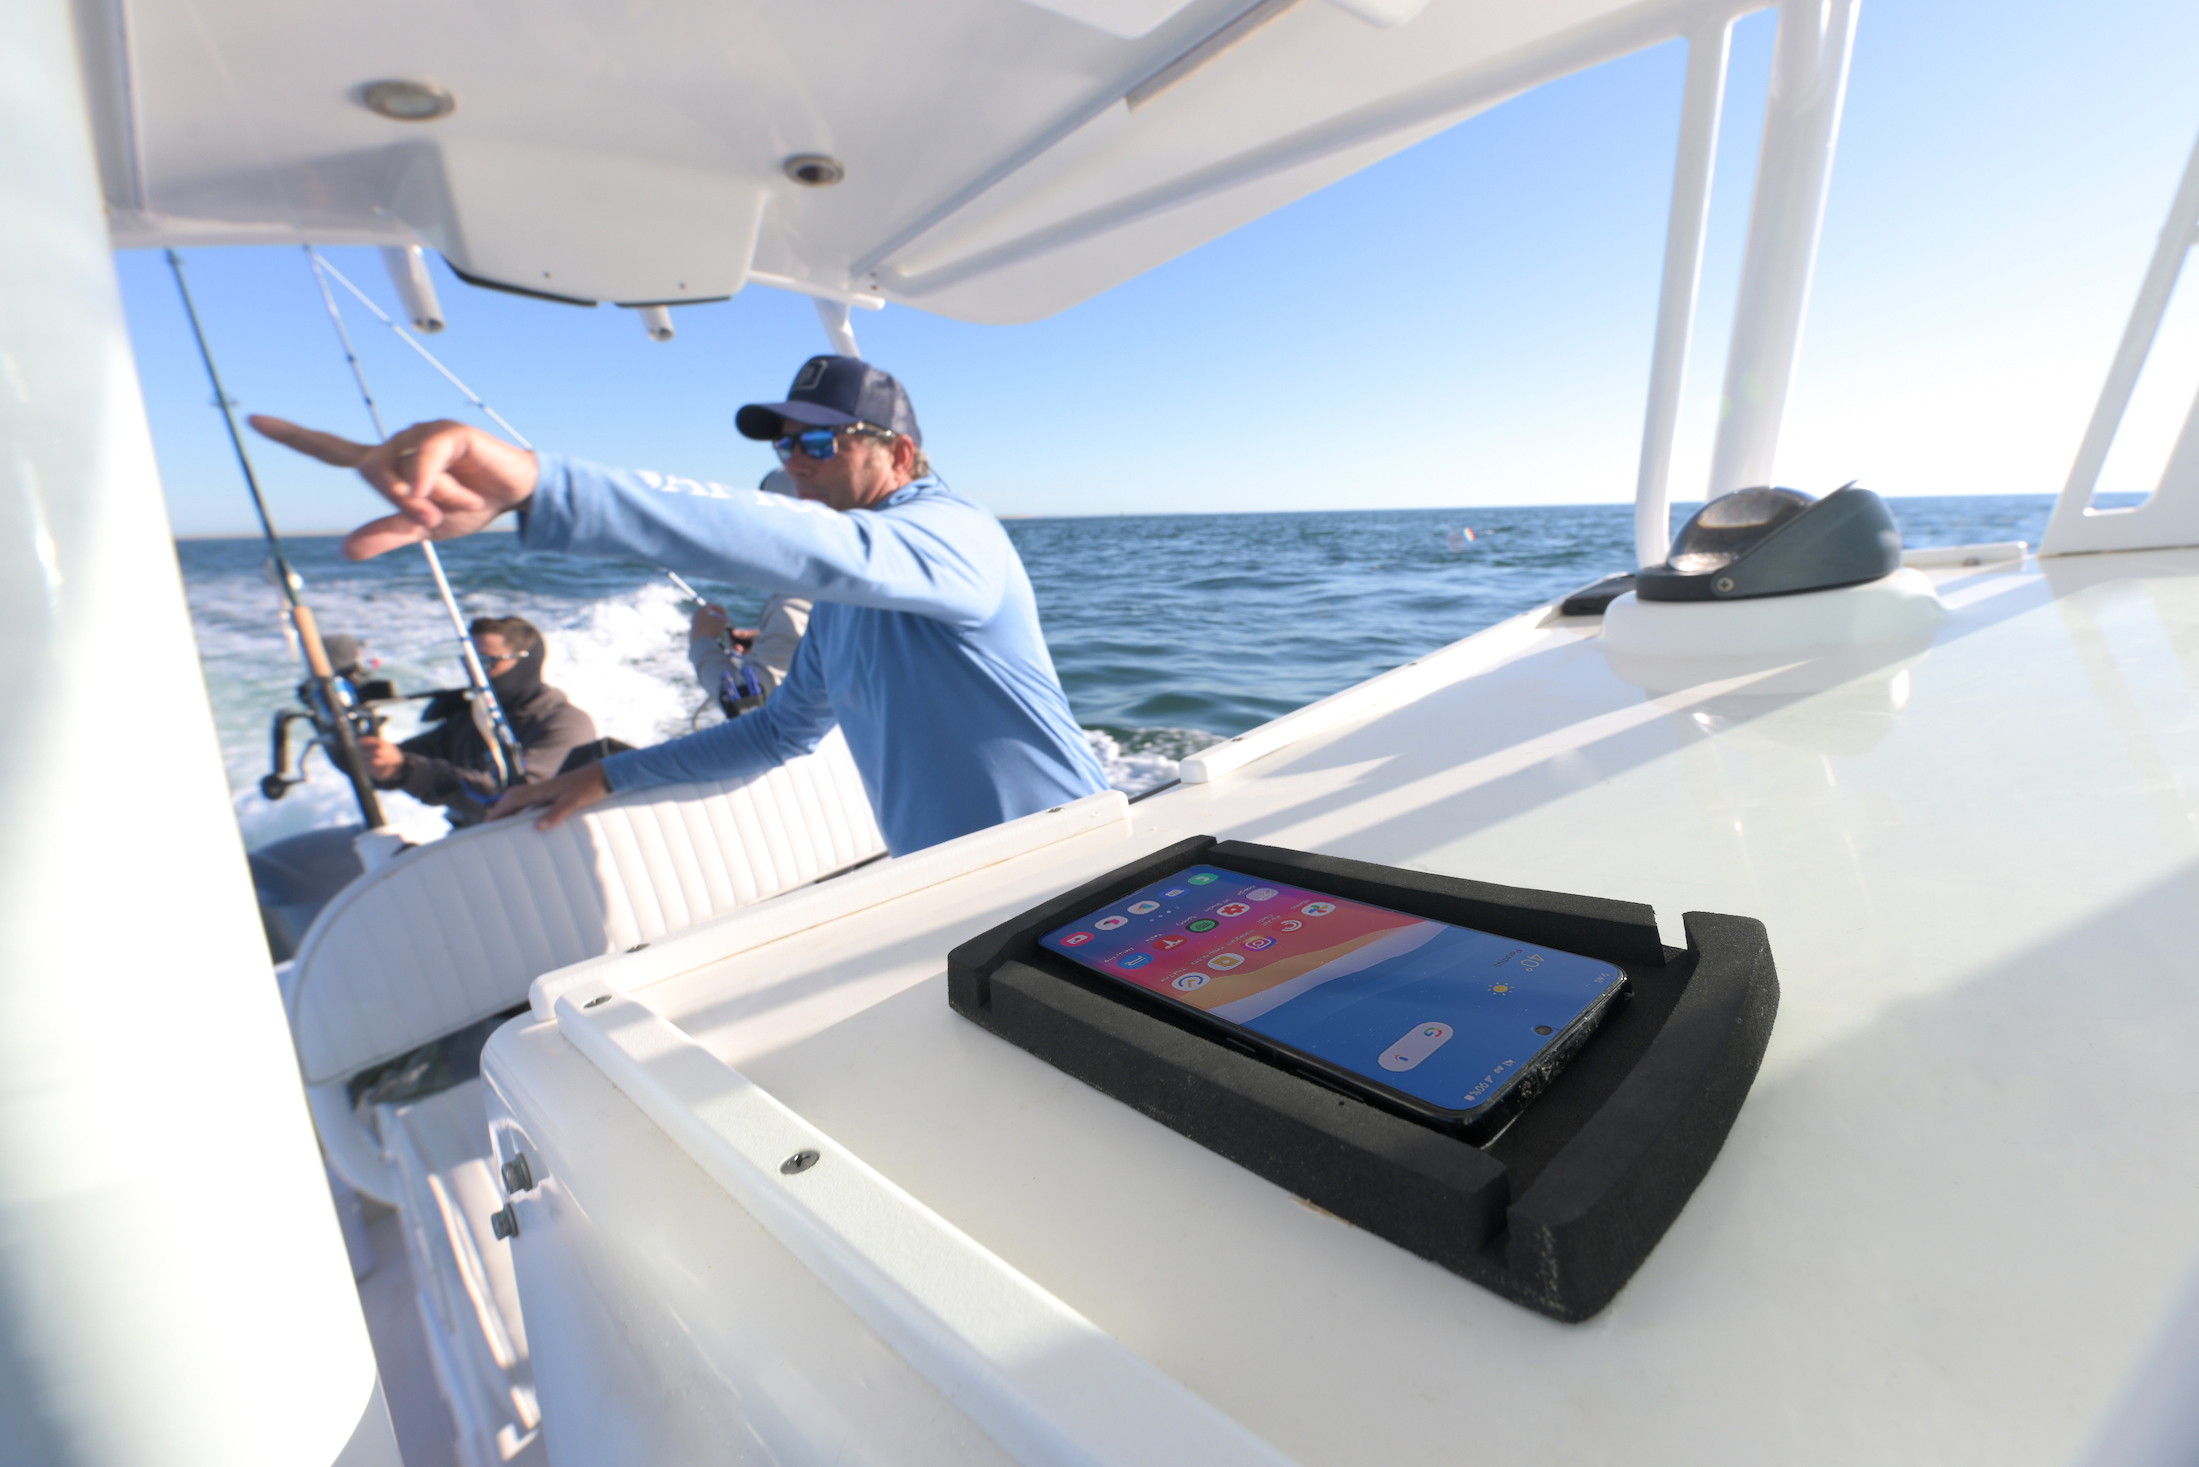 Govee WiFi thermometer and hydrometer, inexpensive and easy off boat  monitoring - Panbo